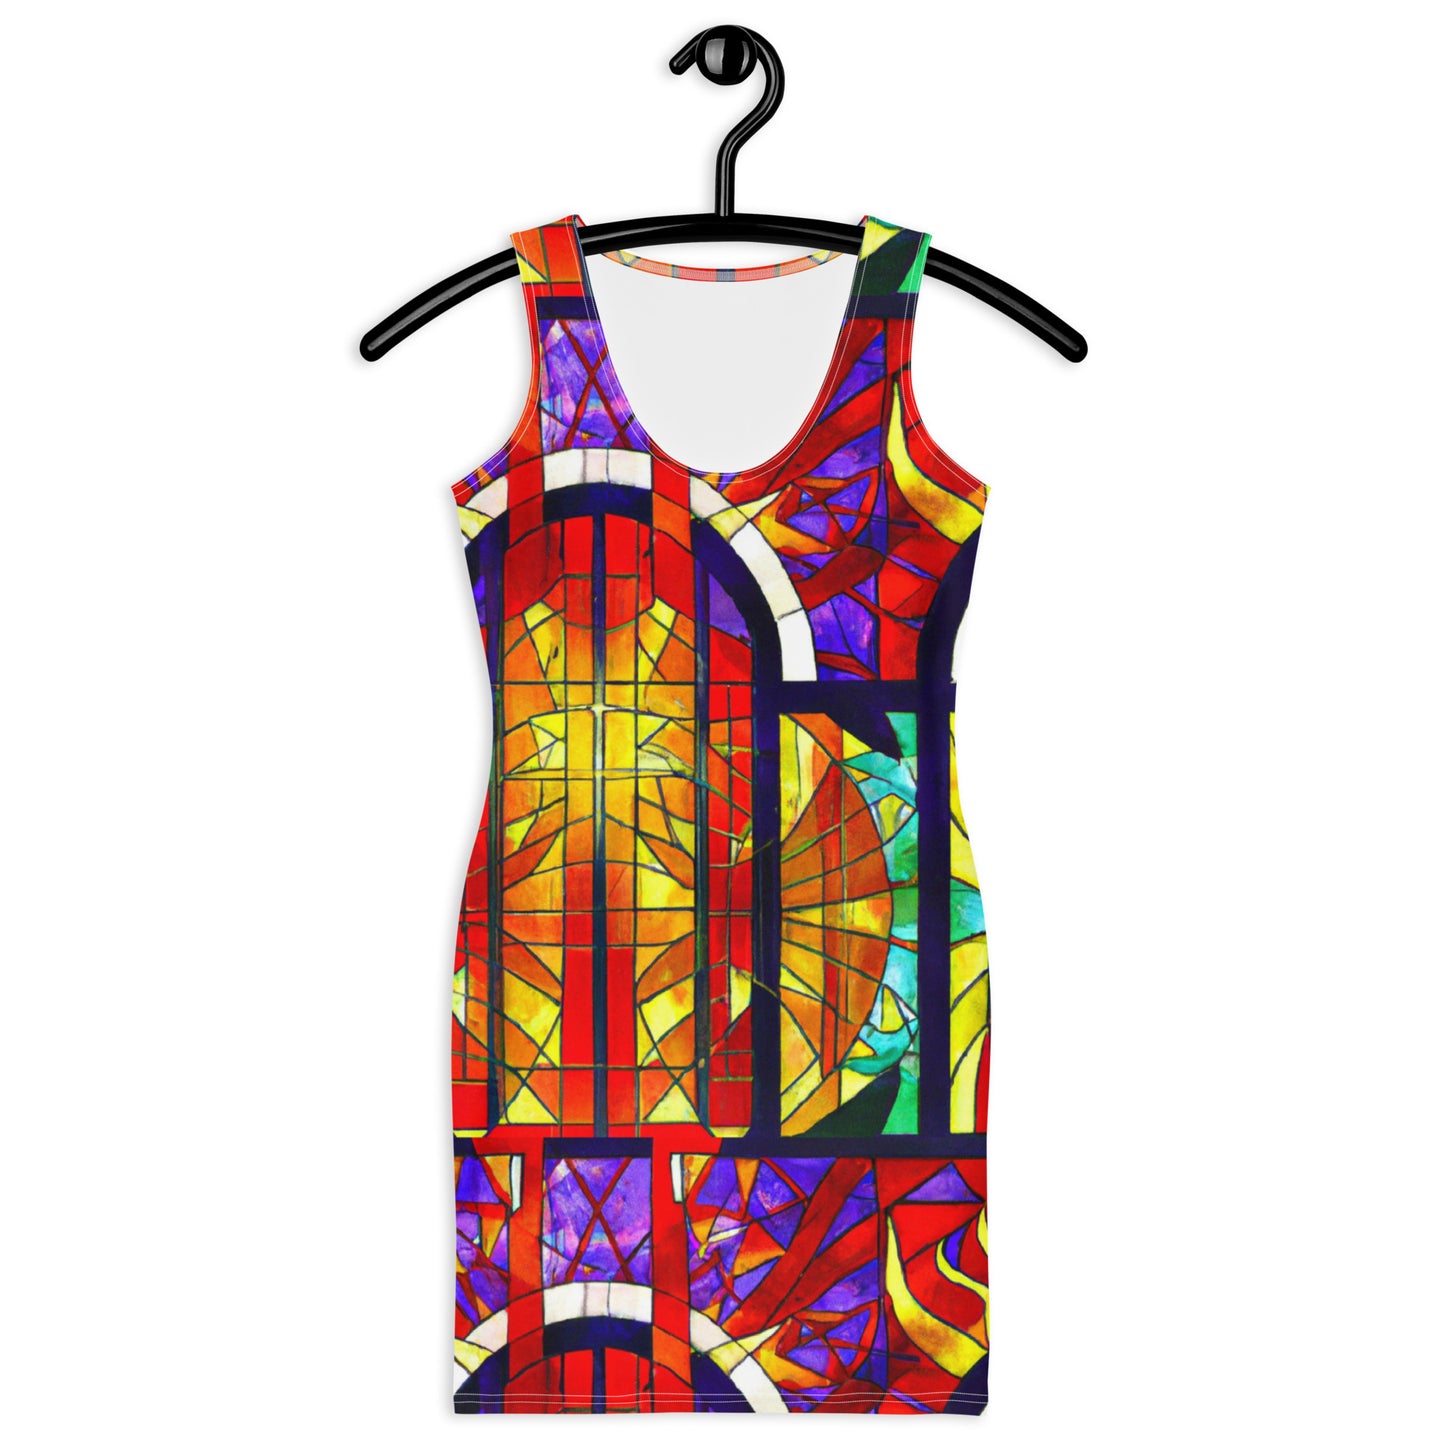 Hellz Palace® Brand Stained Glass Bodycon dress